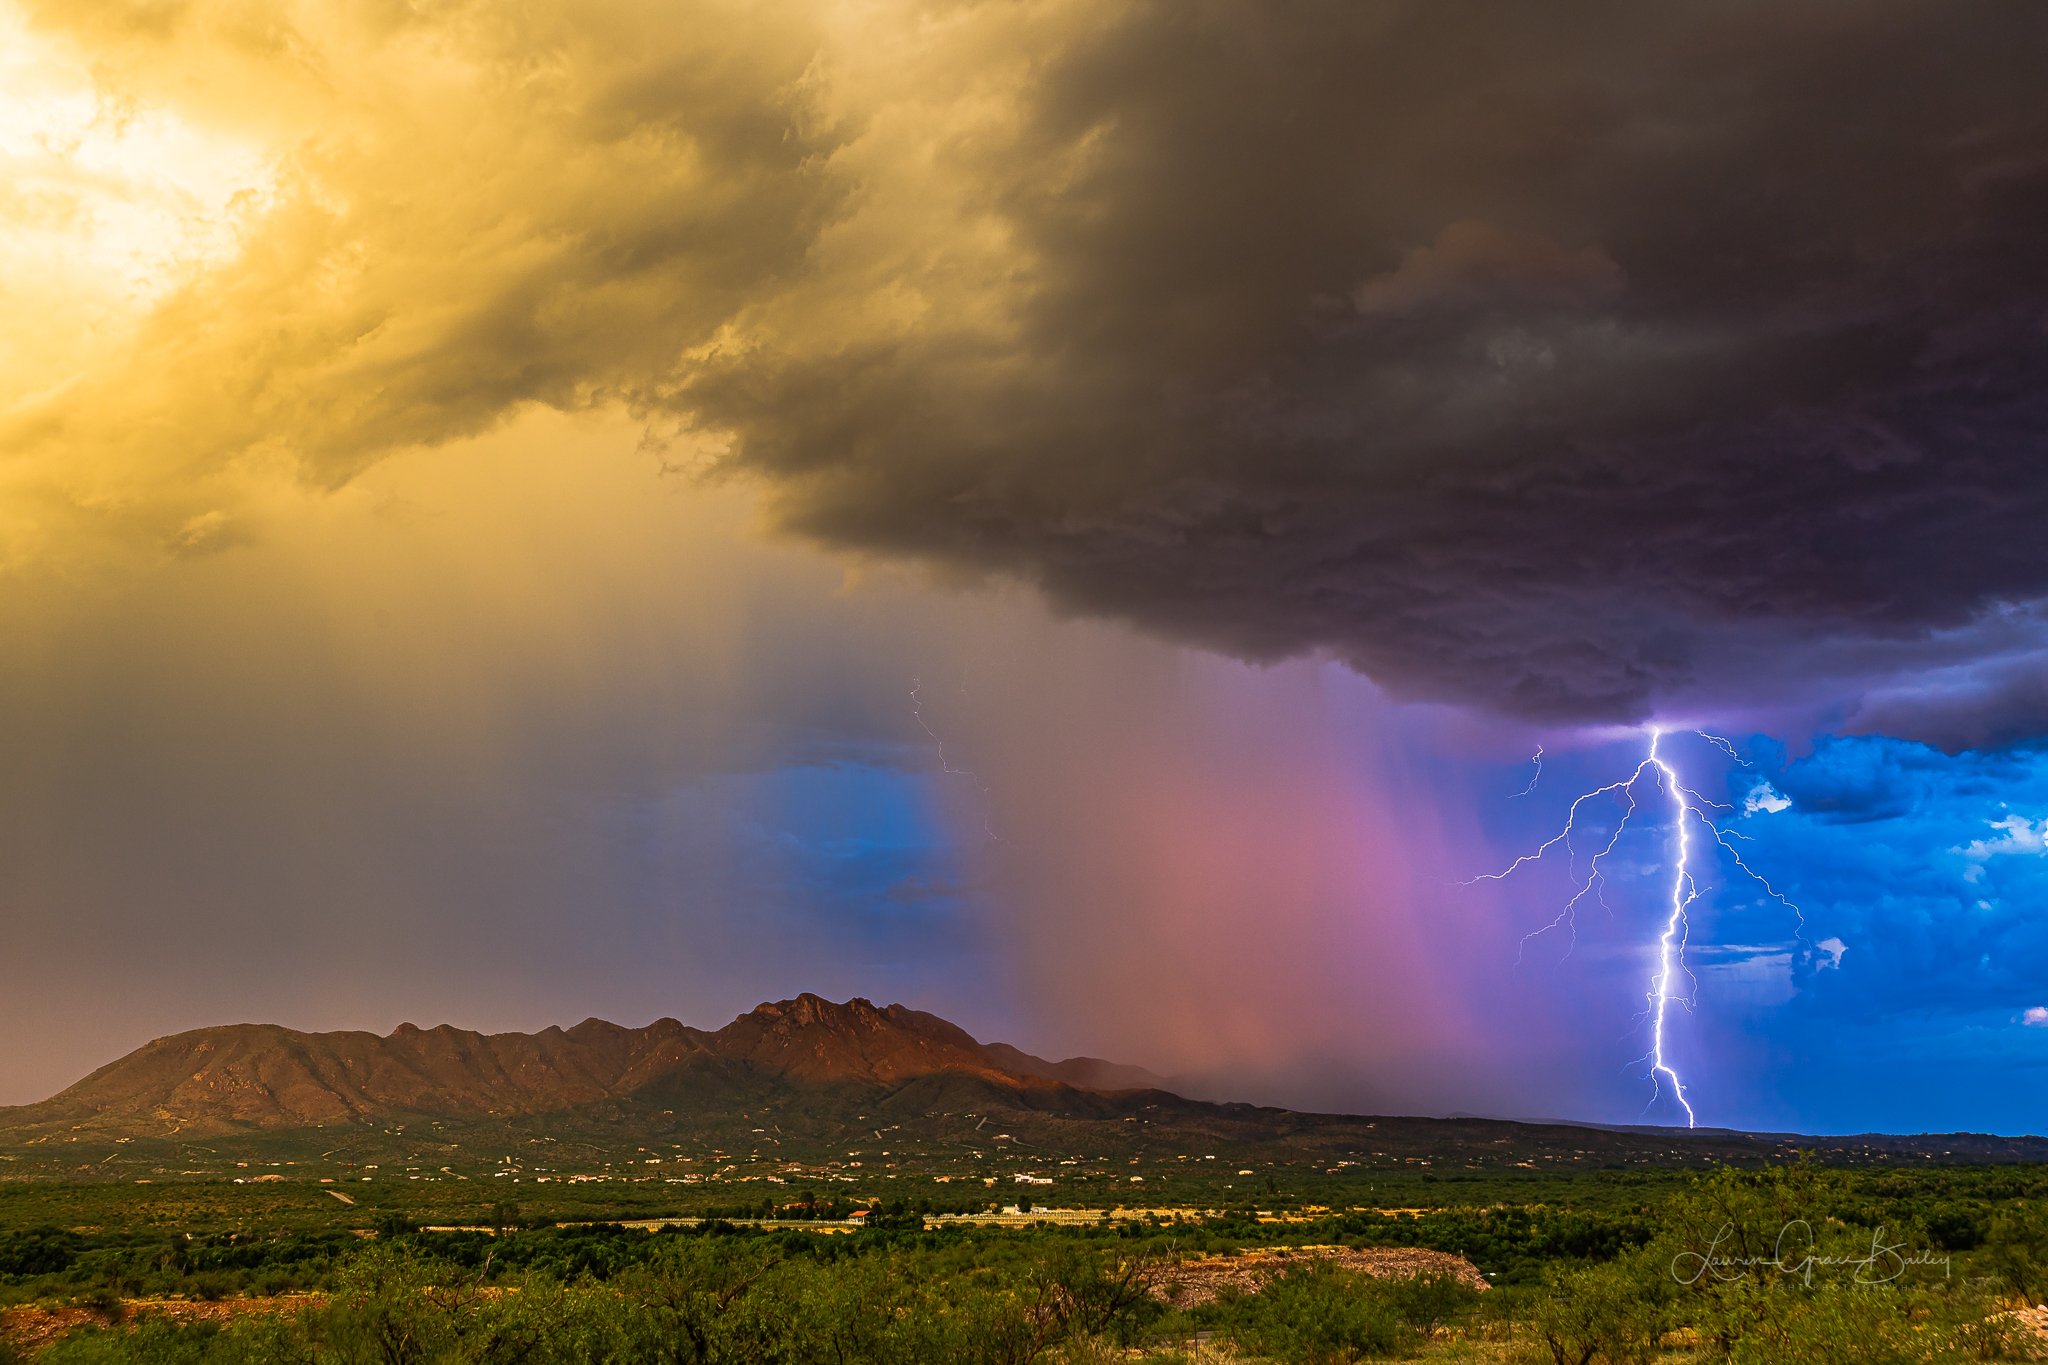 The monsoon in Arizona. Sunset colors, lightning, cloud structure, green valleys and mountain backdrops. Rio Rico. By Lori Grace Bailey @lorigraceaz